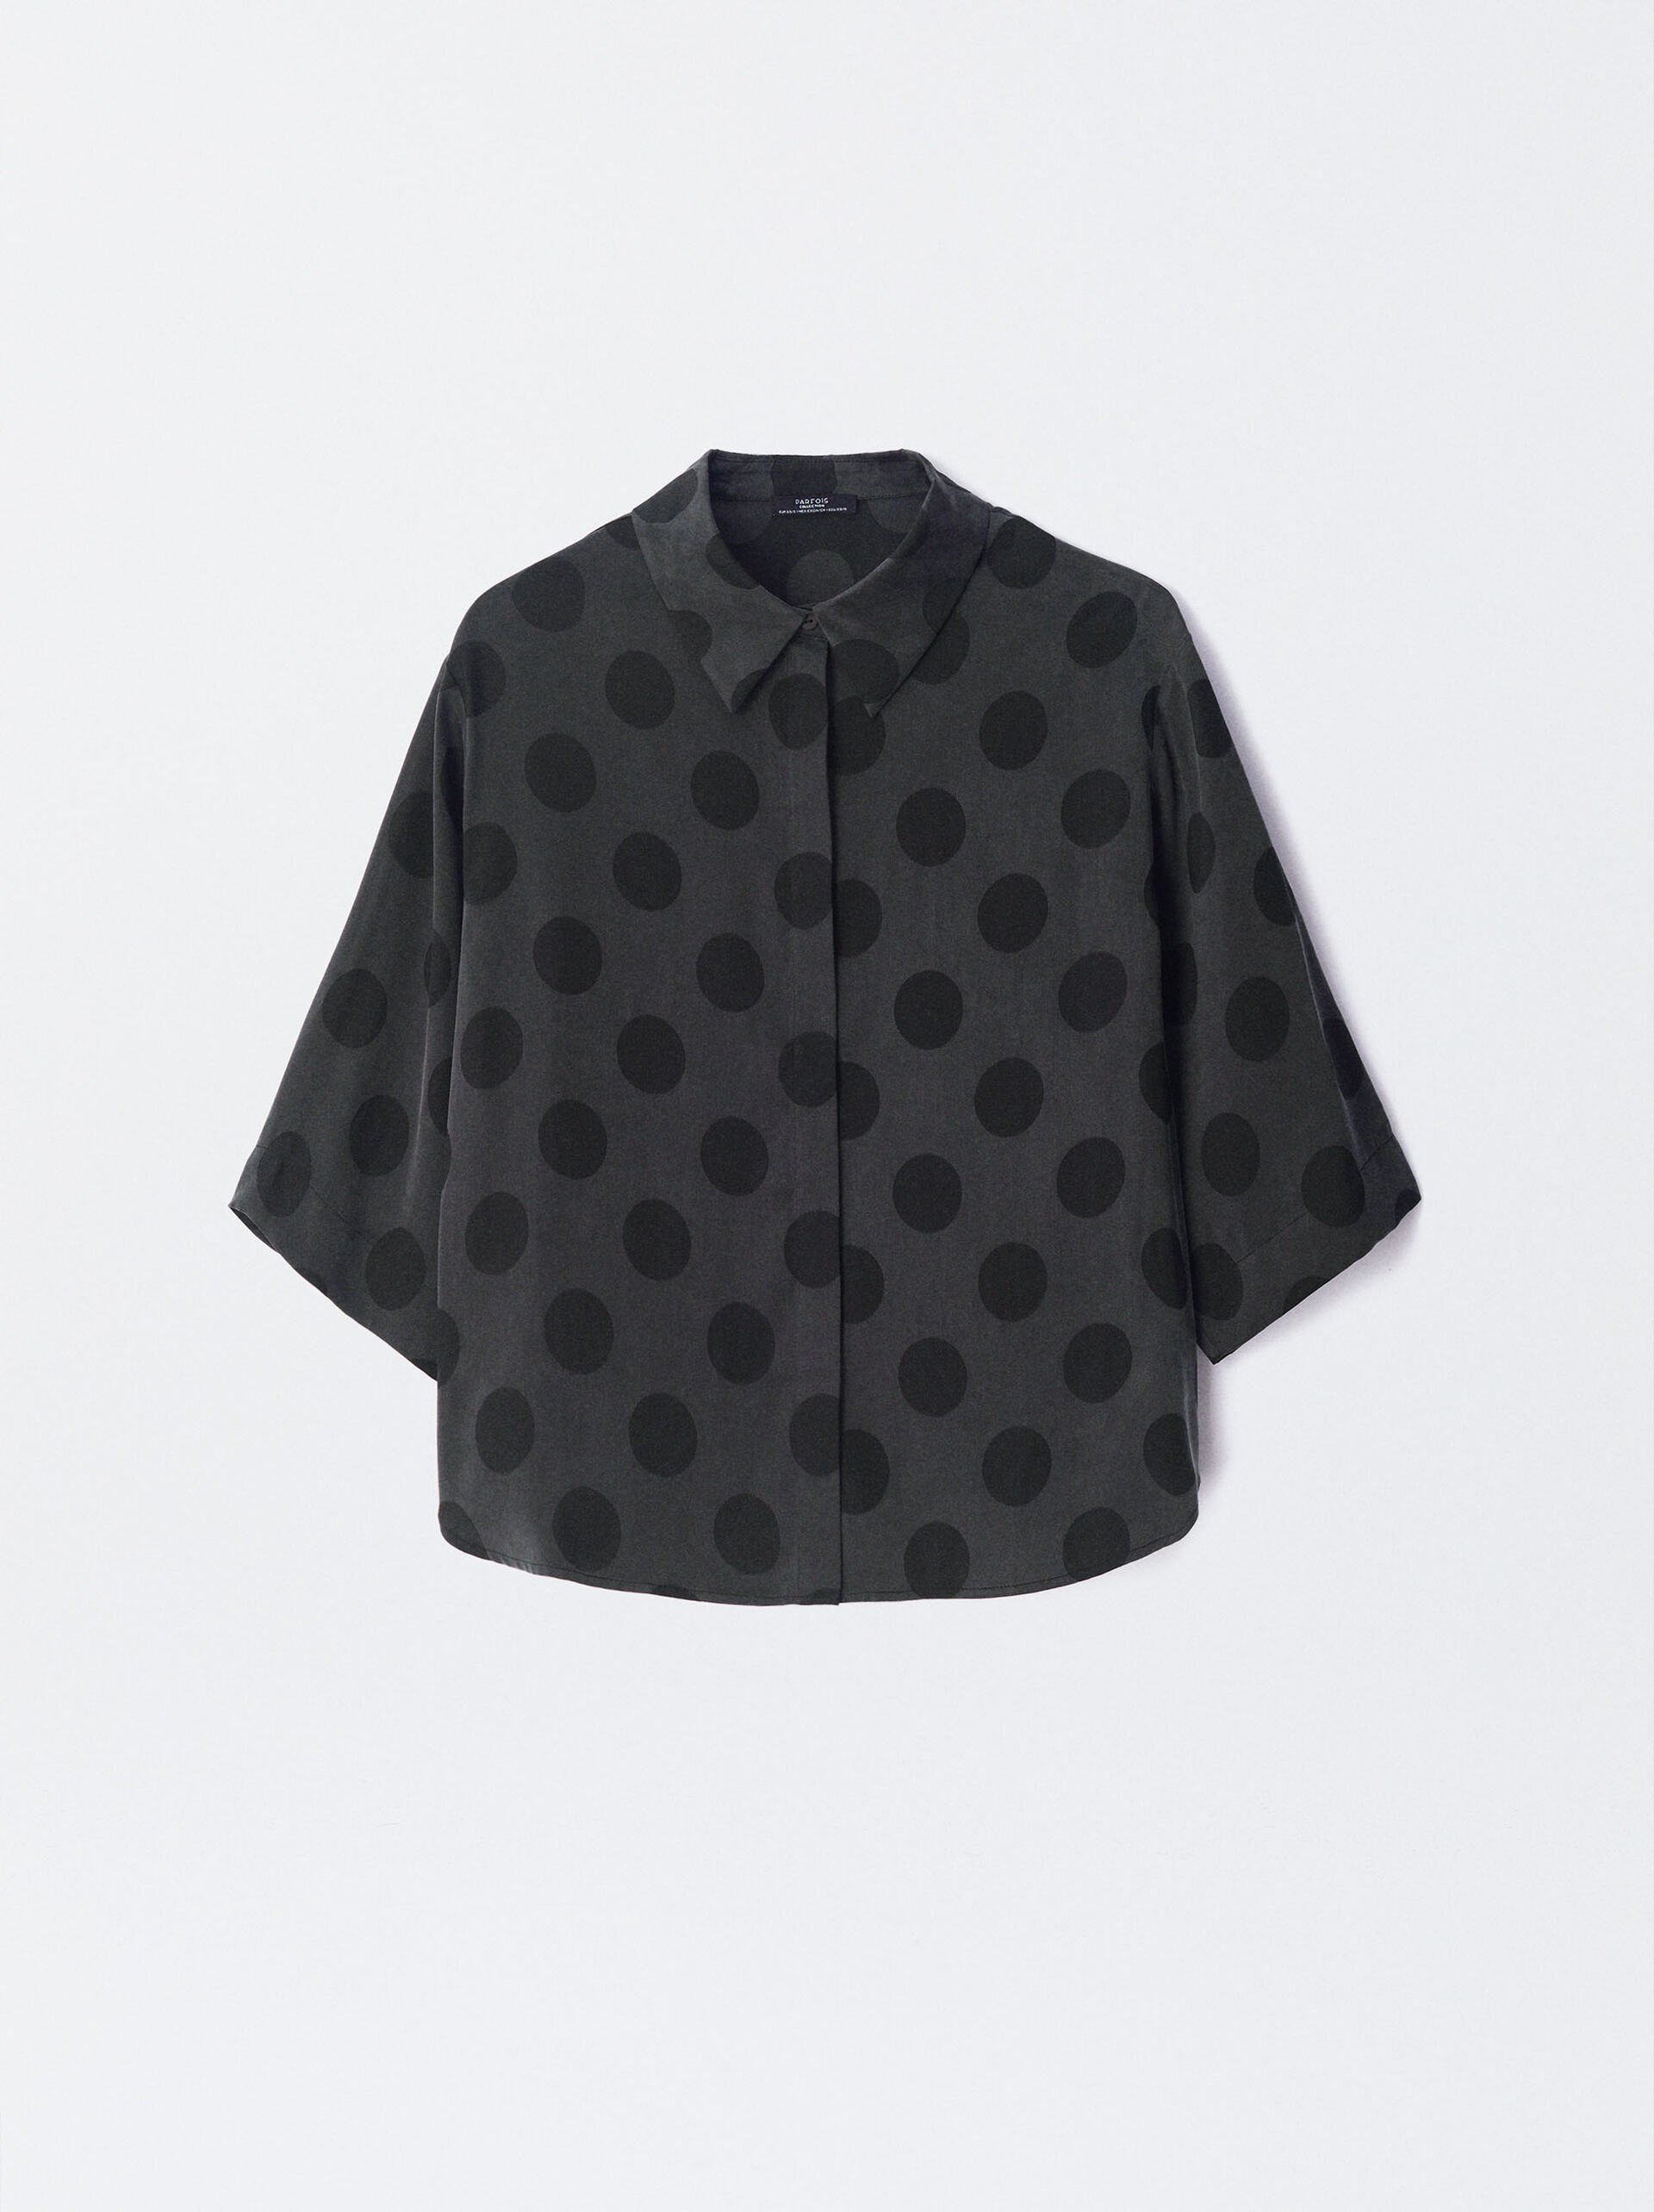 Exclusivo Online - Camisa Lyocell Bolinhas image number 5.0